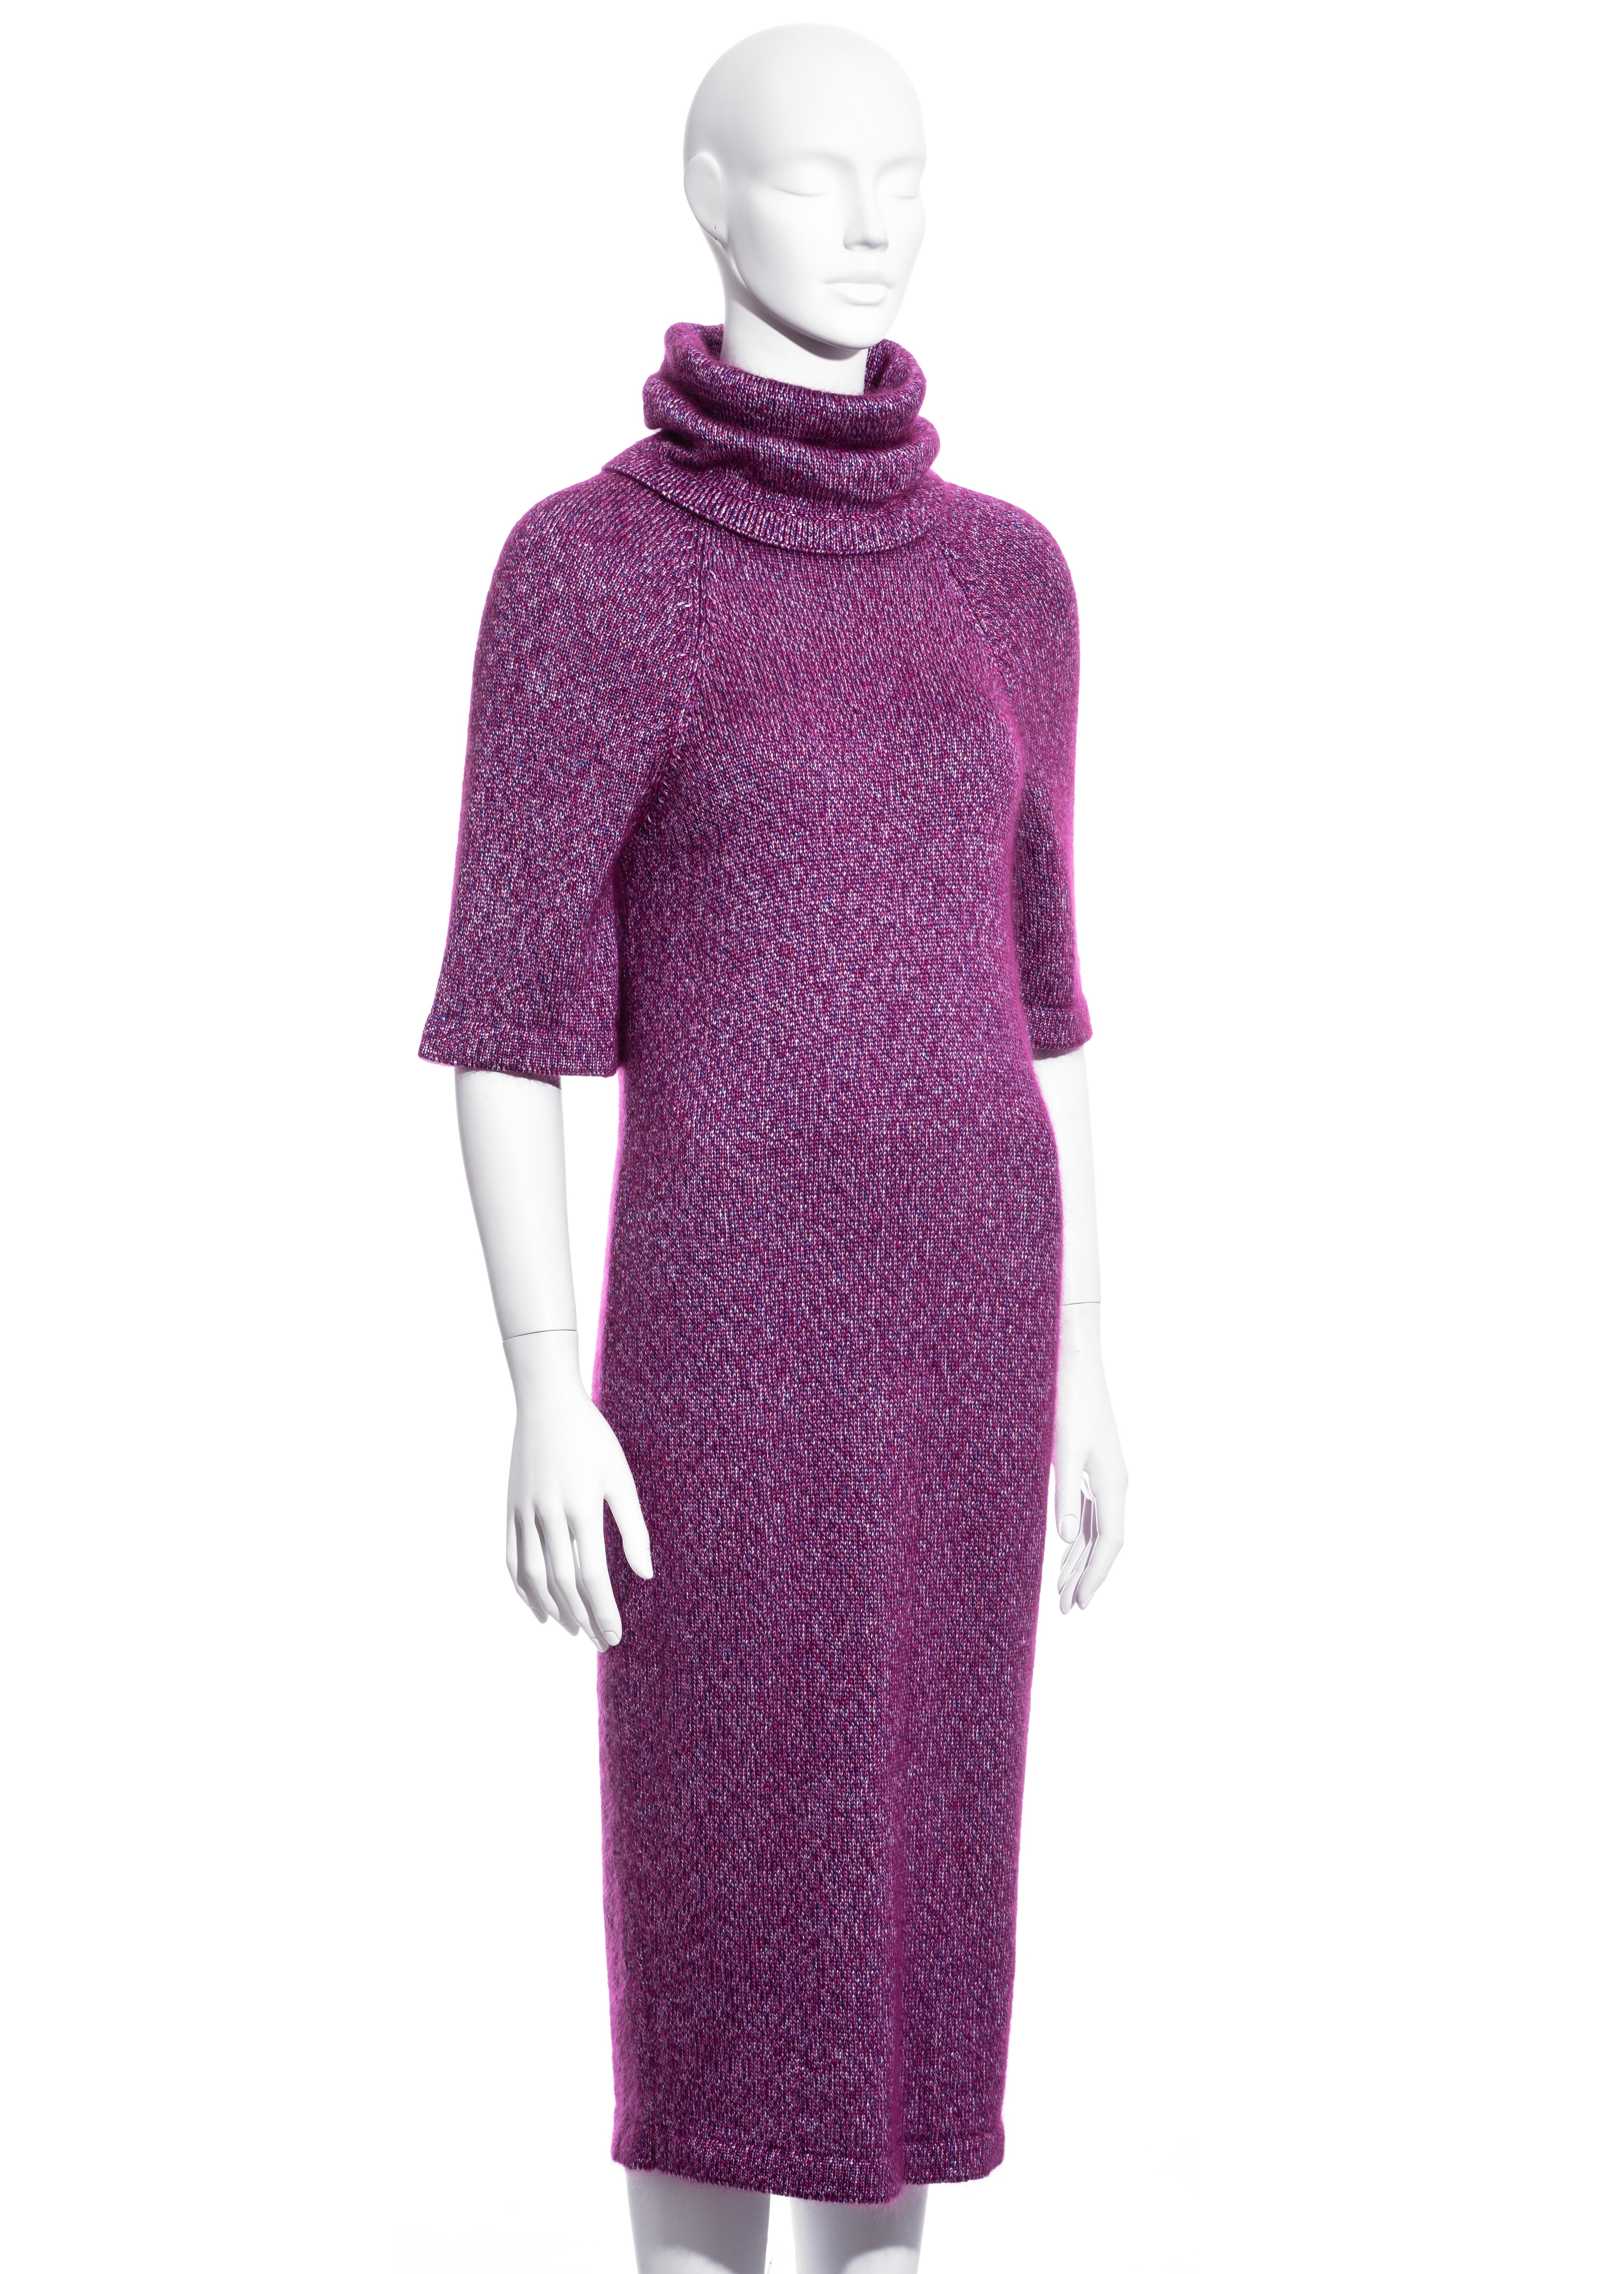 ▪ Chanel robe pull en maille fuchsia
▪ Design/One par Karl Lagerfeld 
79% soie, 21% mohair 
▪ Col roulé extra long 
▪ FR 36 - UK 8 - US 4
▪ Automne-Hiver 2015